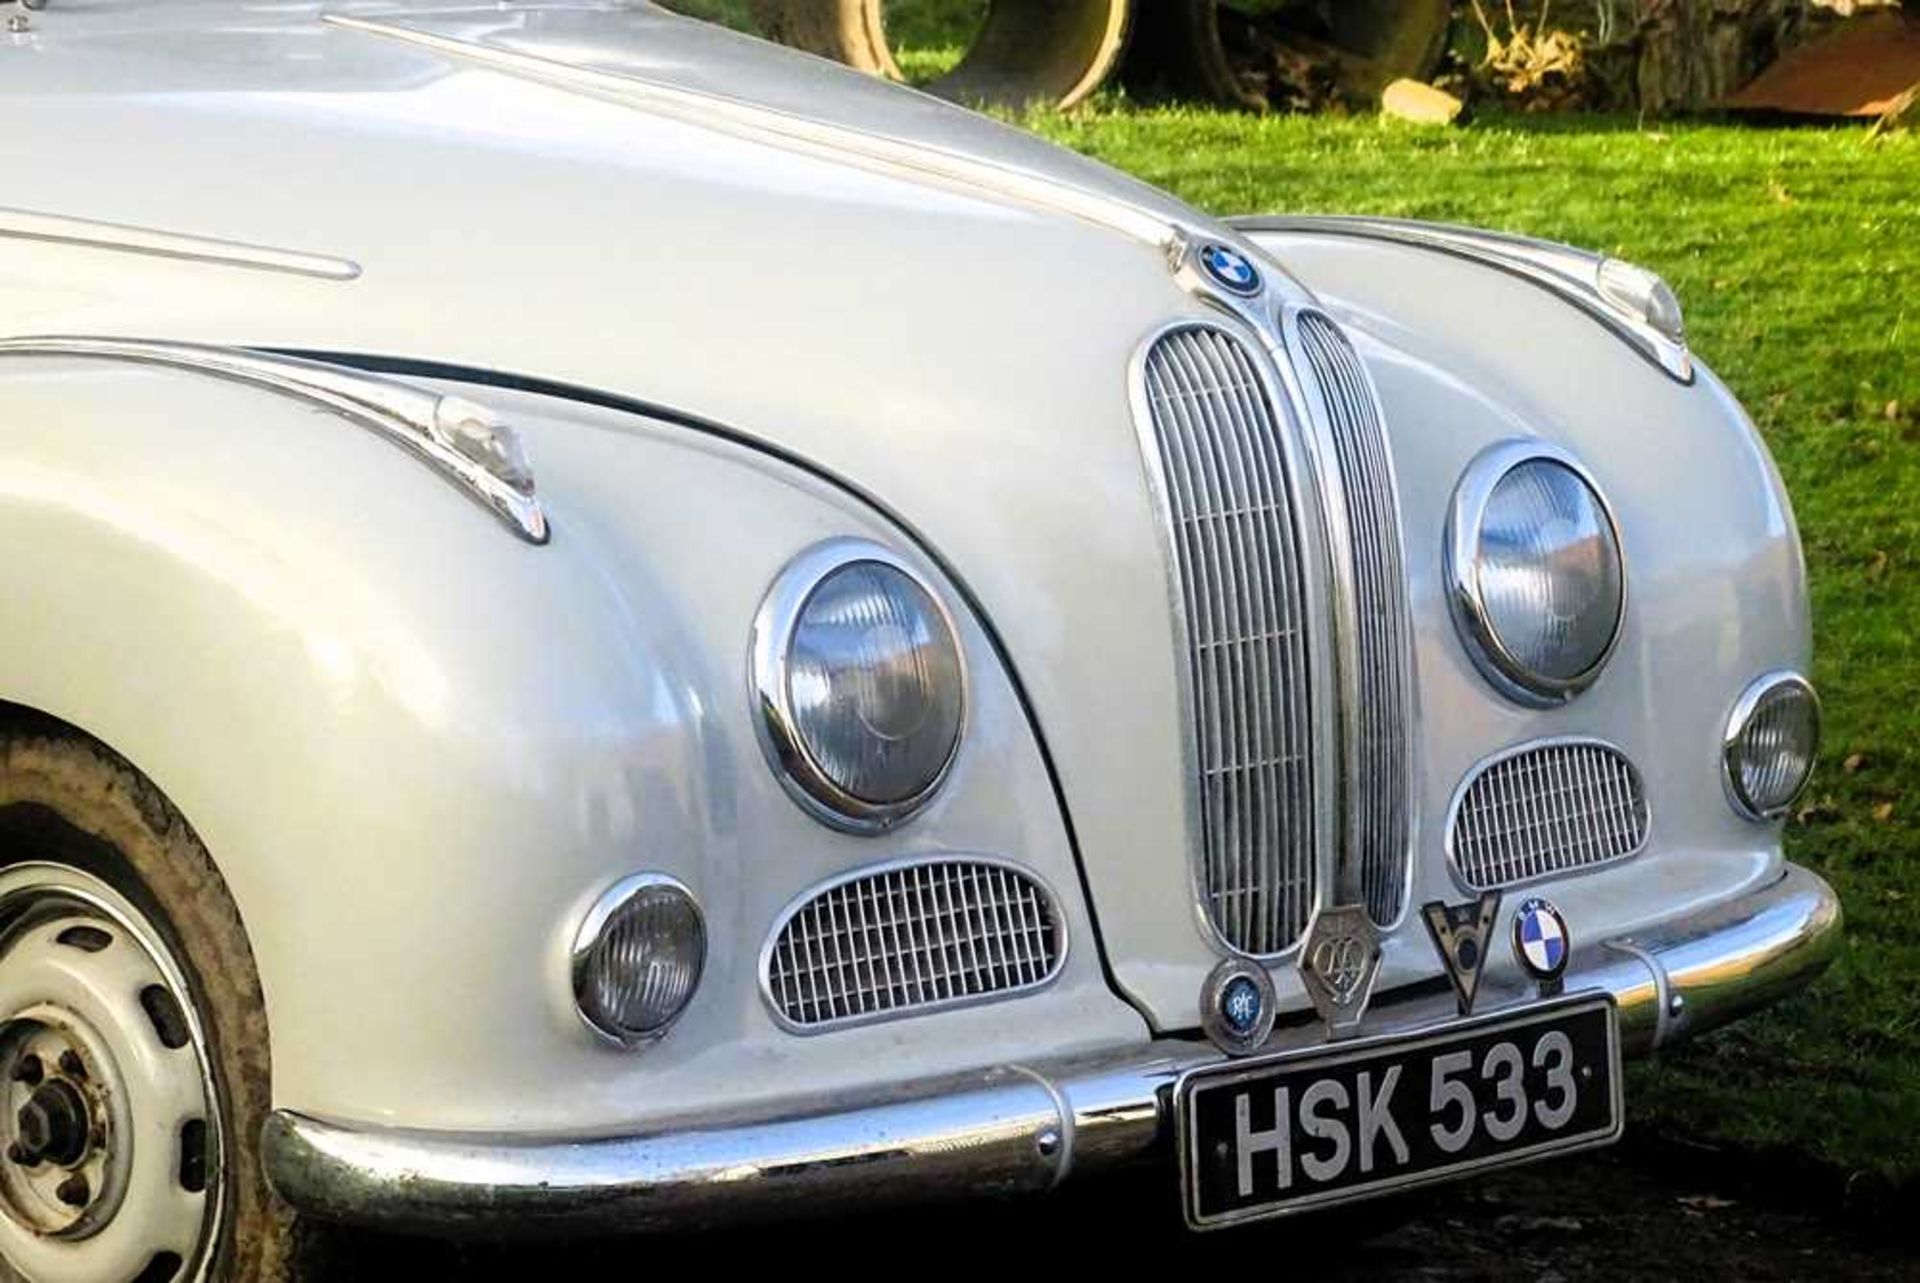 1957 BMW 502 Believed to be 1 of only 12 supplied new to the UK market - Image 16 of 64